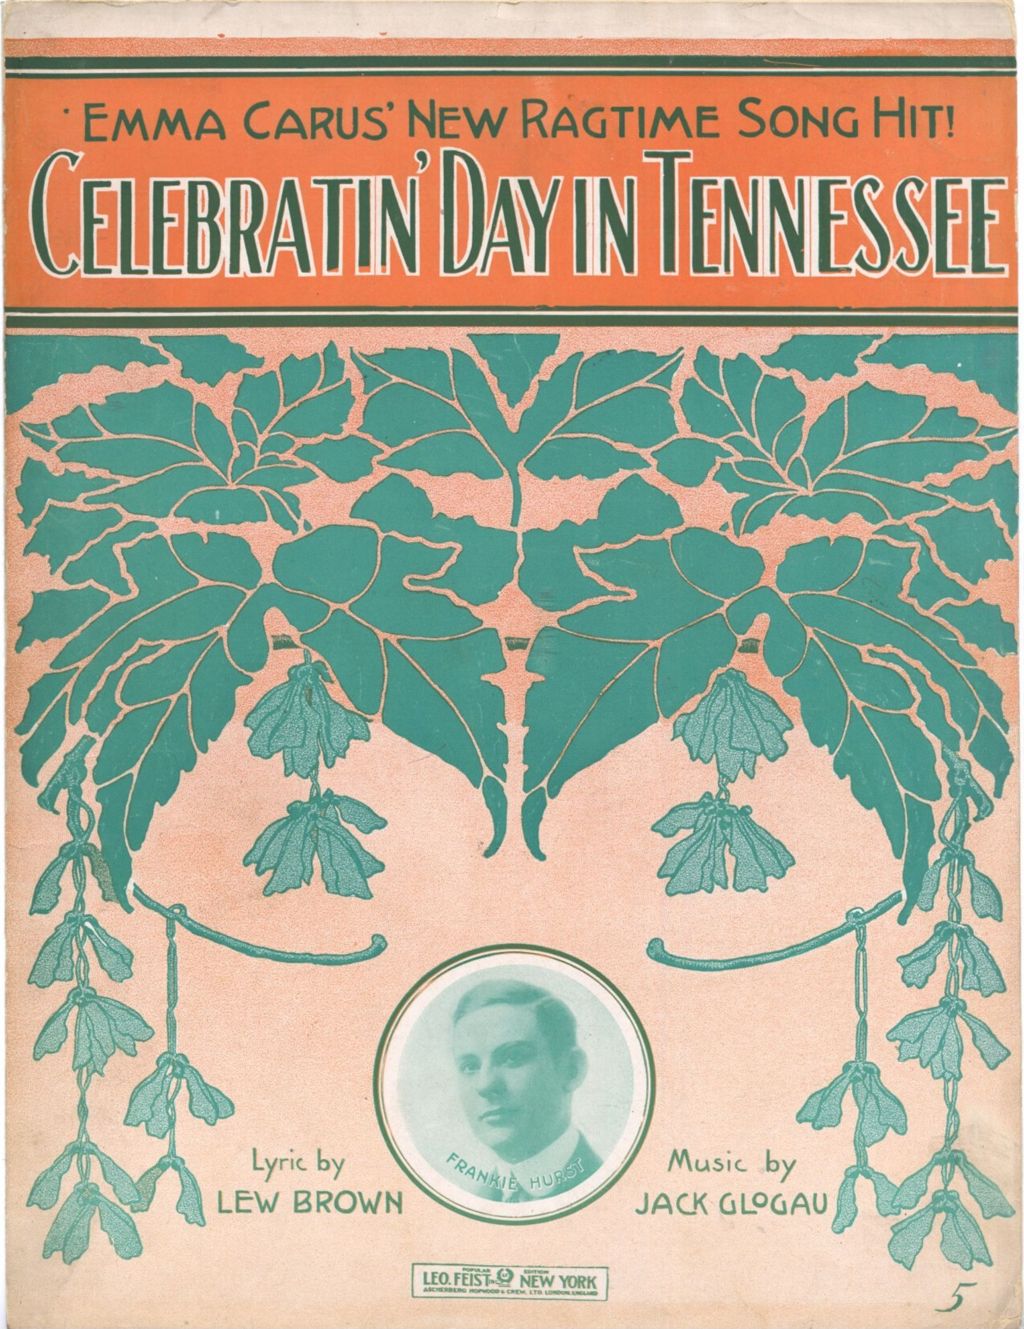 Miniature of Celebratin' Day In Tennessee